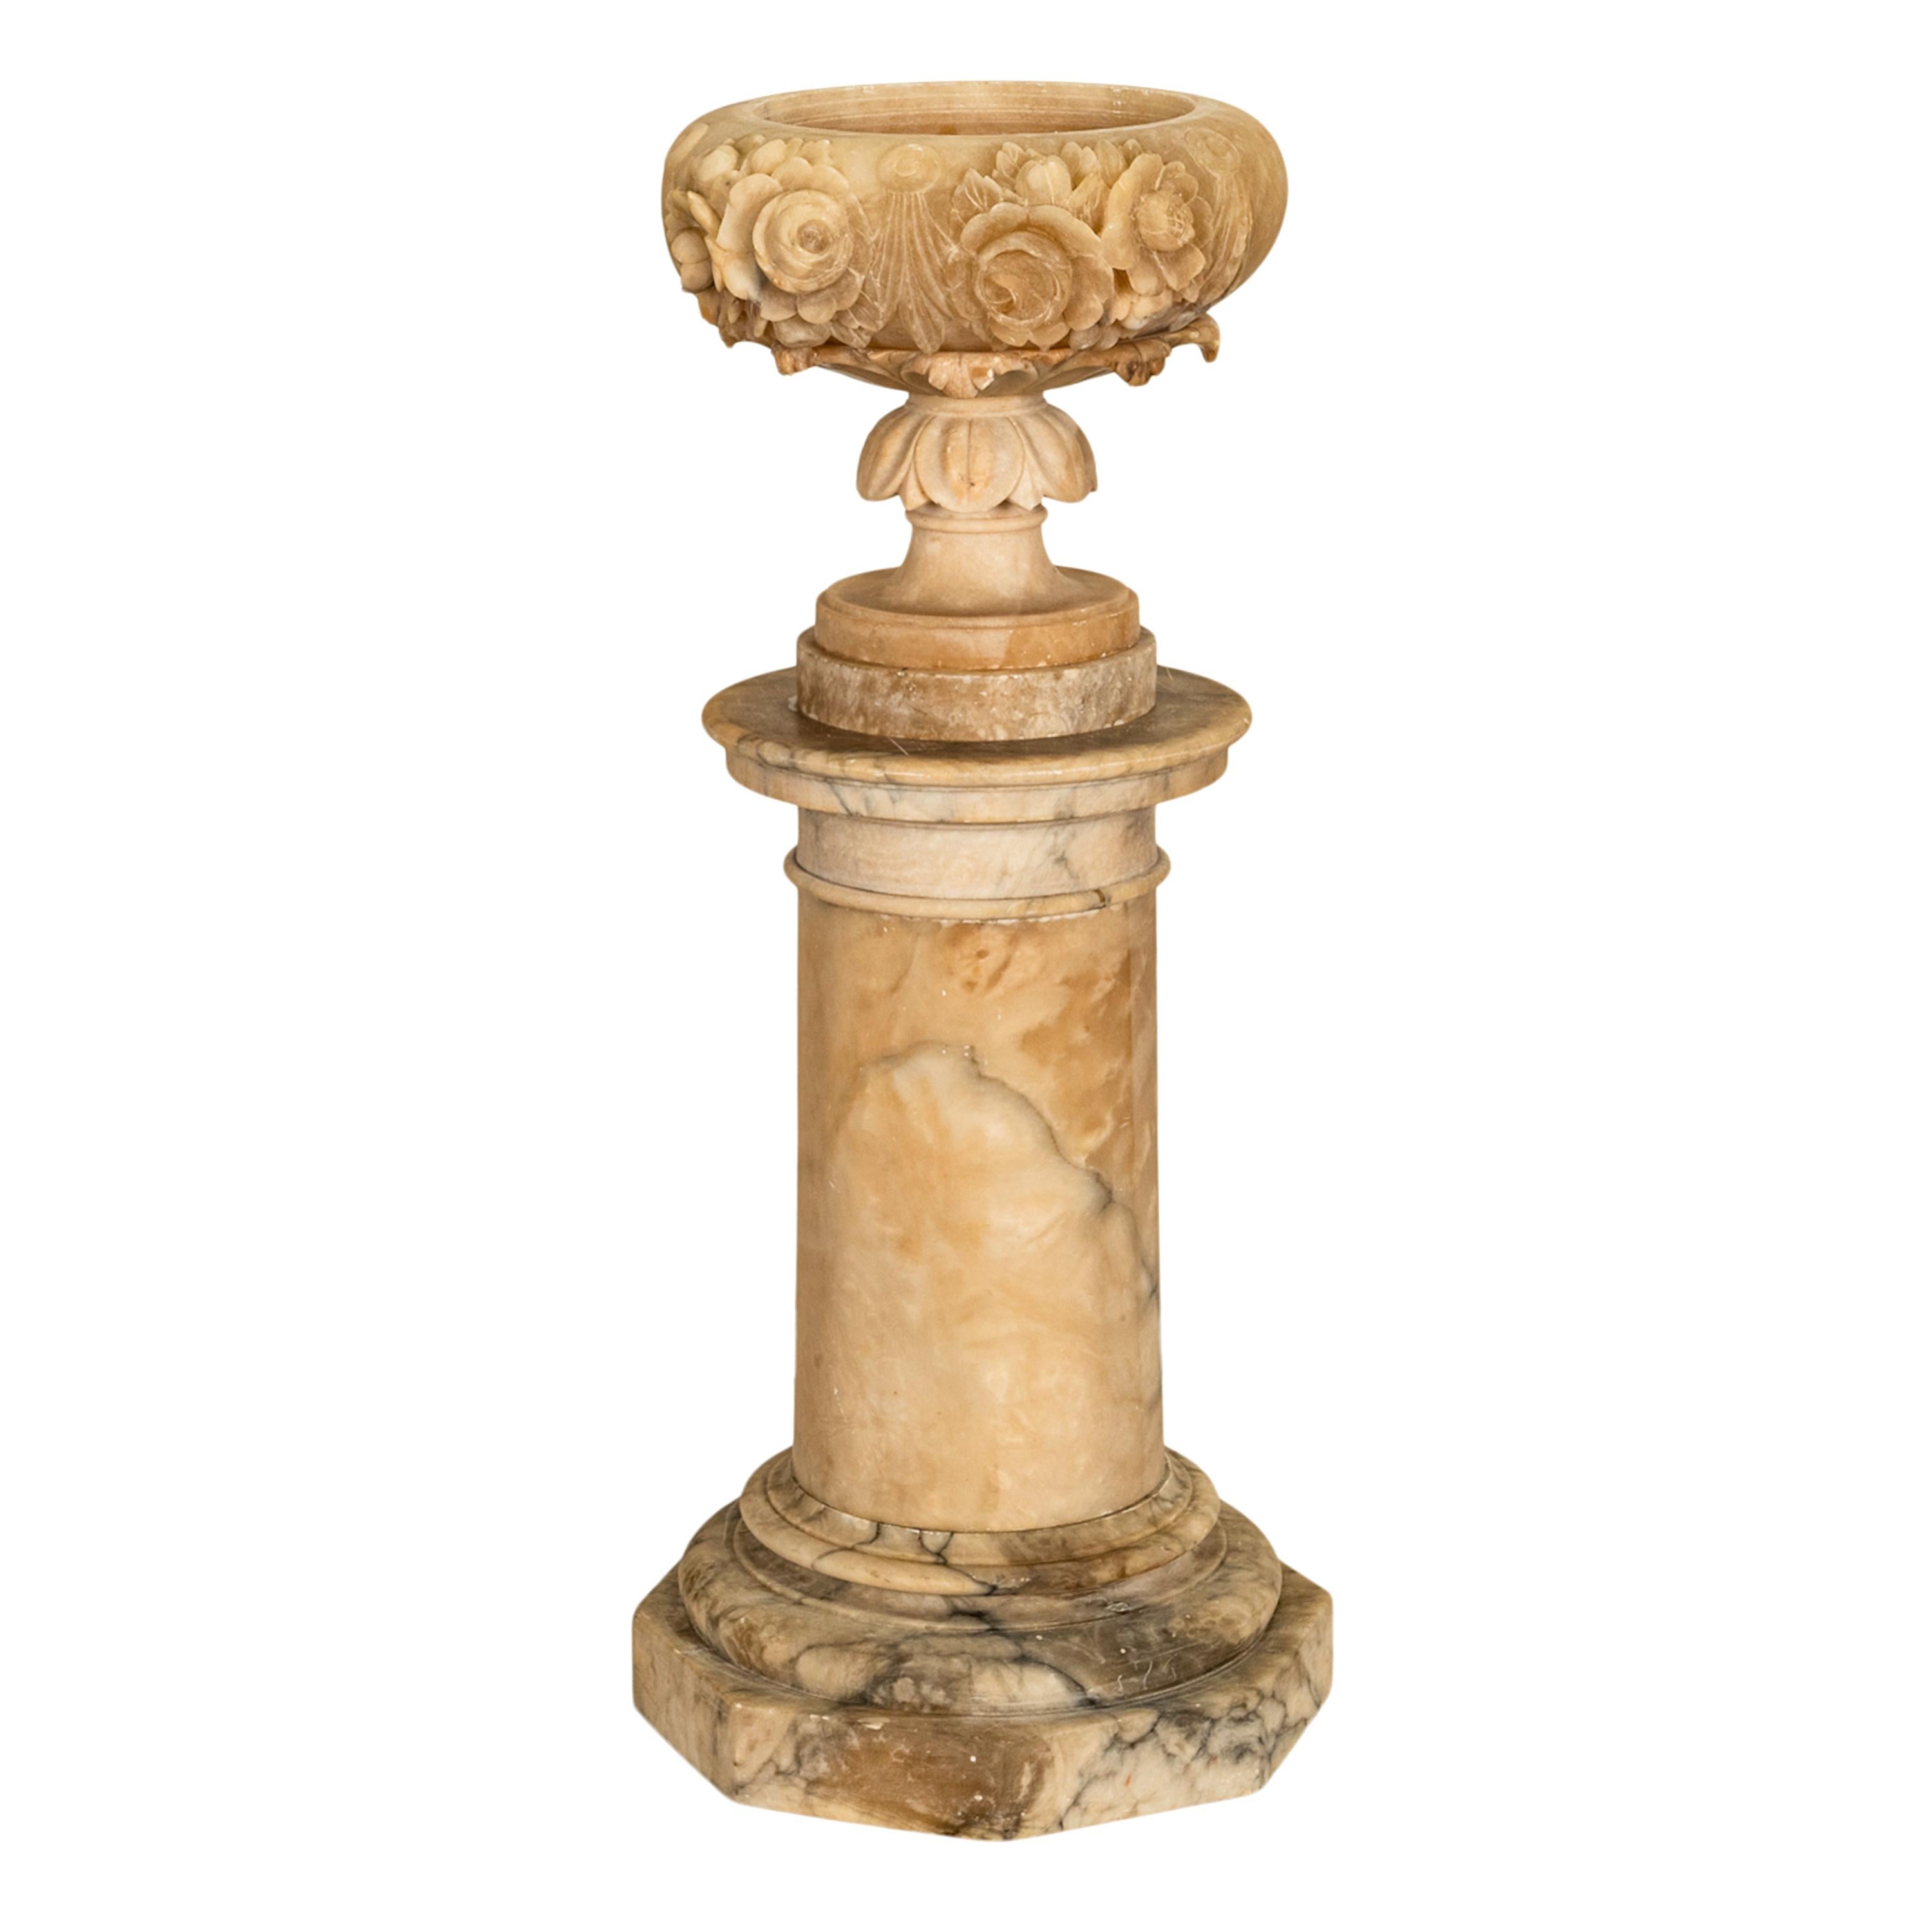 Antique 19th Century Italian Carved Alabaster Neoclassical Urn on Pedestal 1850 For Sale 4